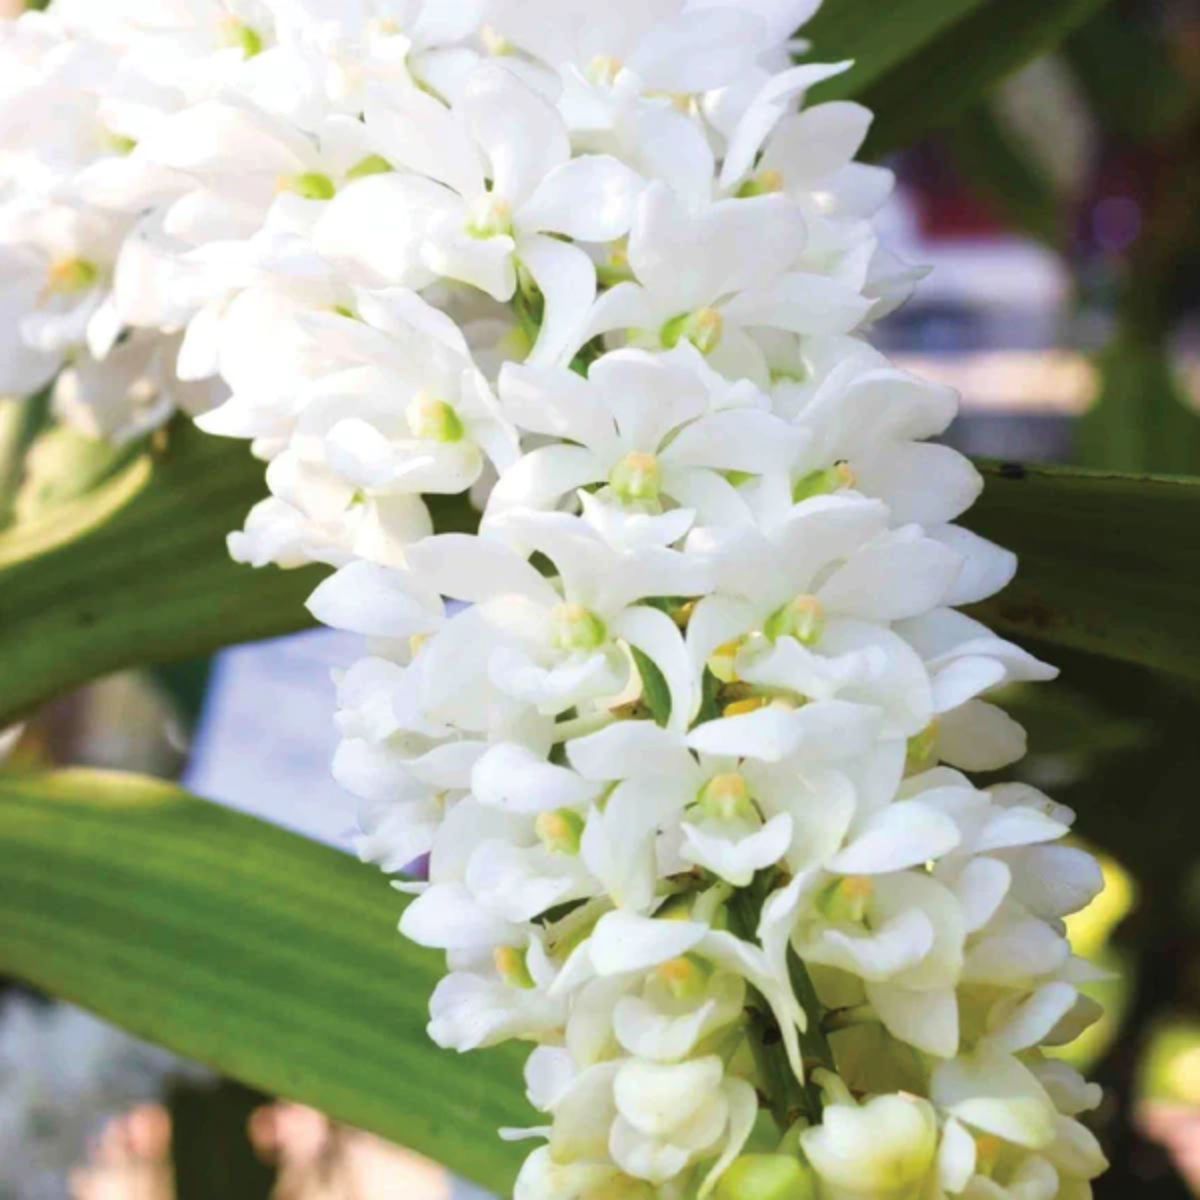 Rhynchostylis Gigantea White Orchid Flower - Majestic White Blooms, a Symbol of Elegance and Serenity